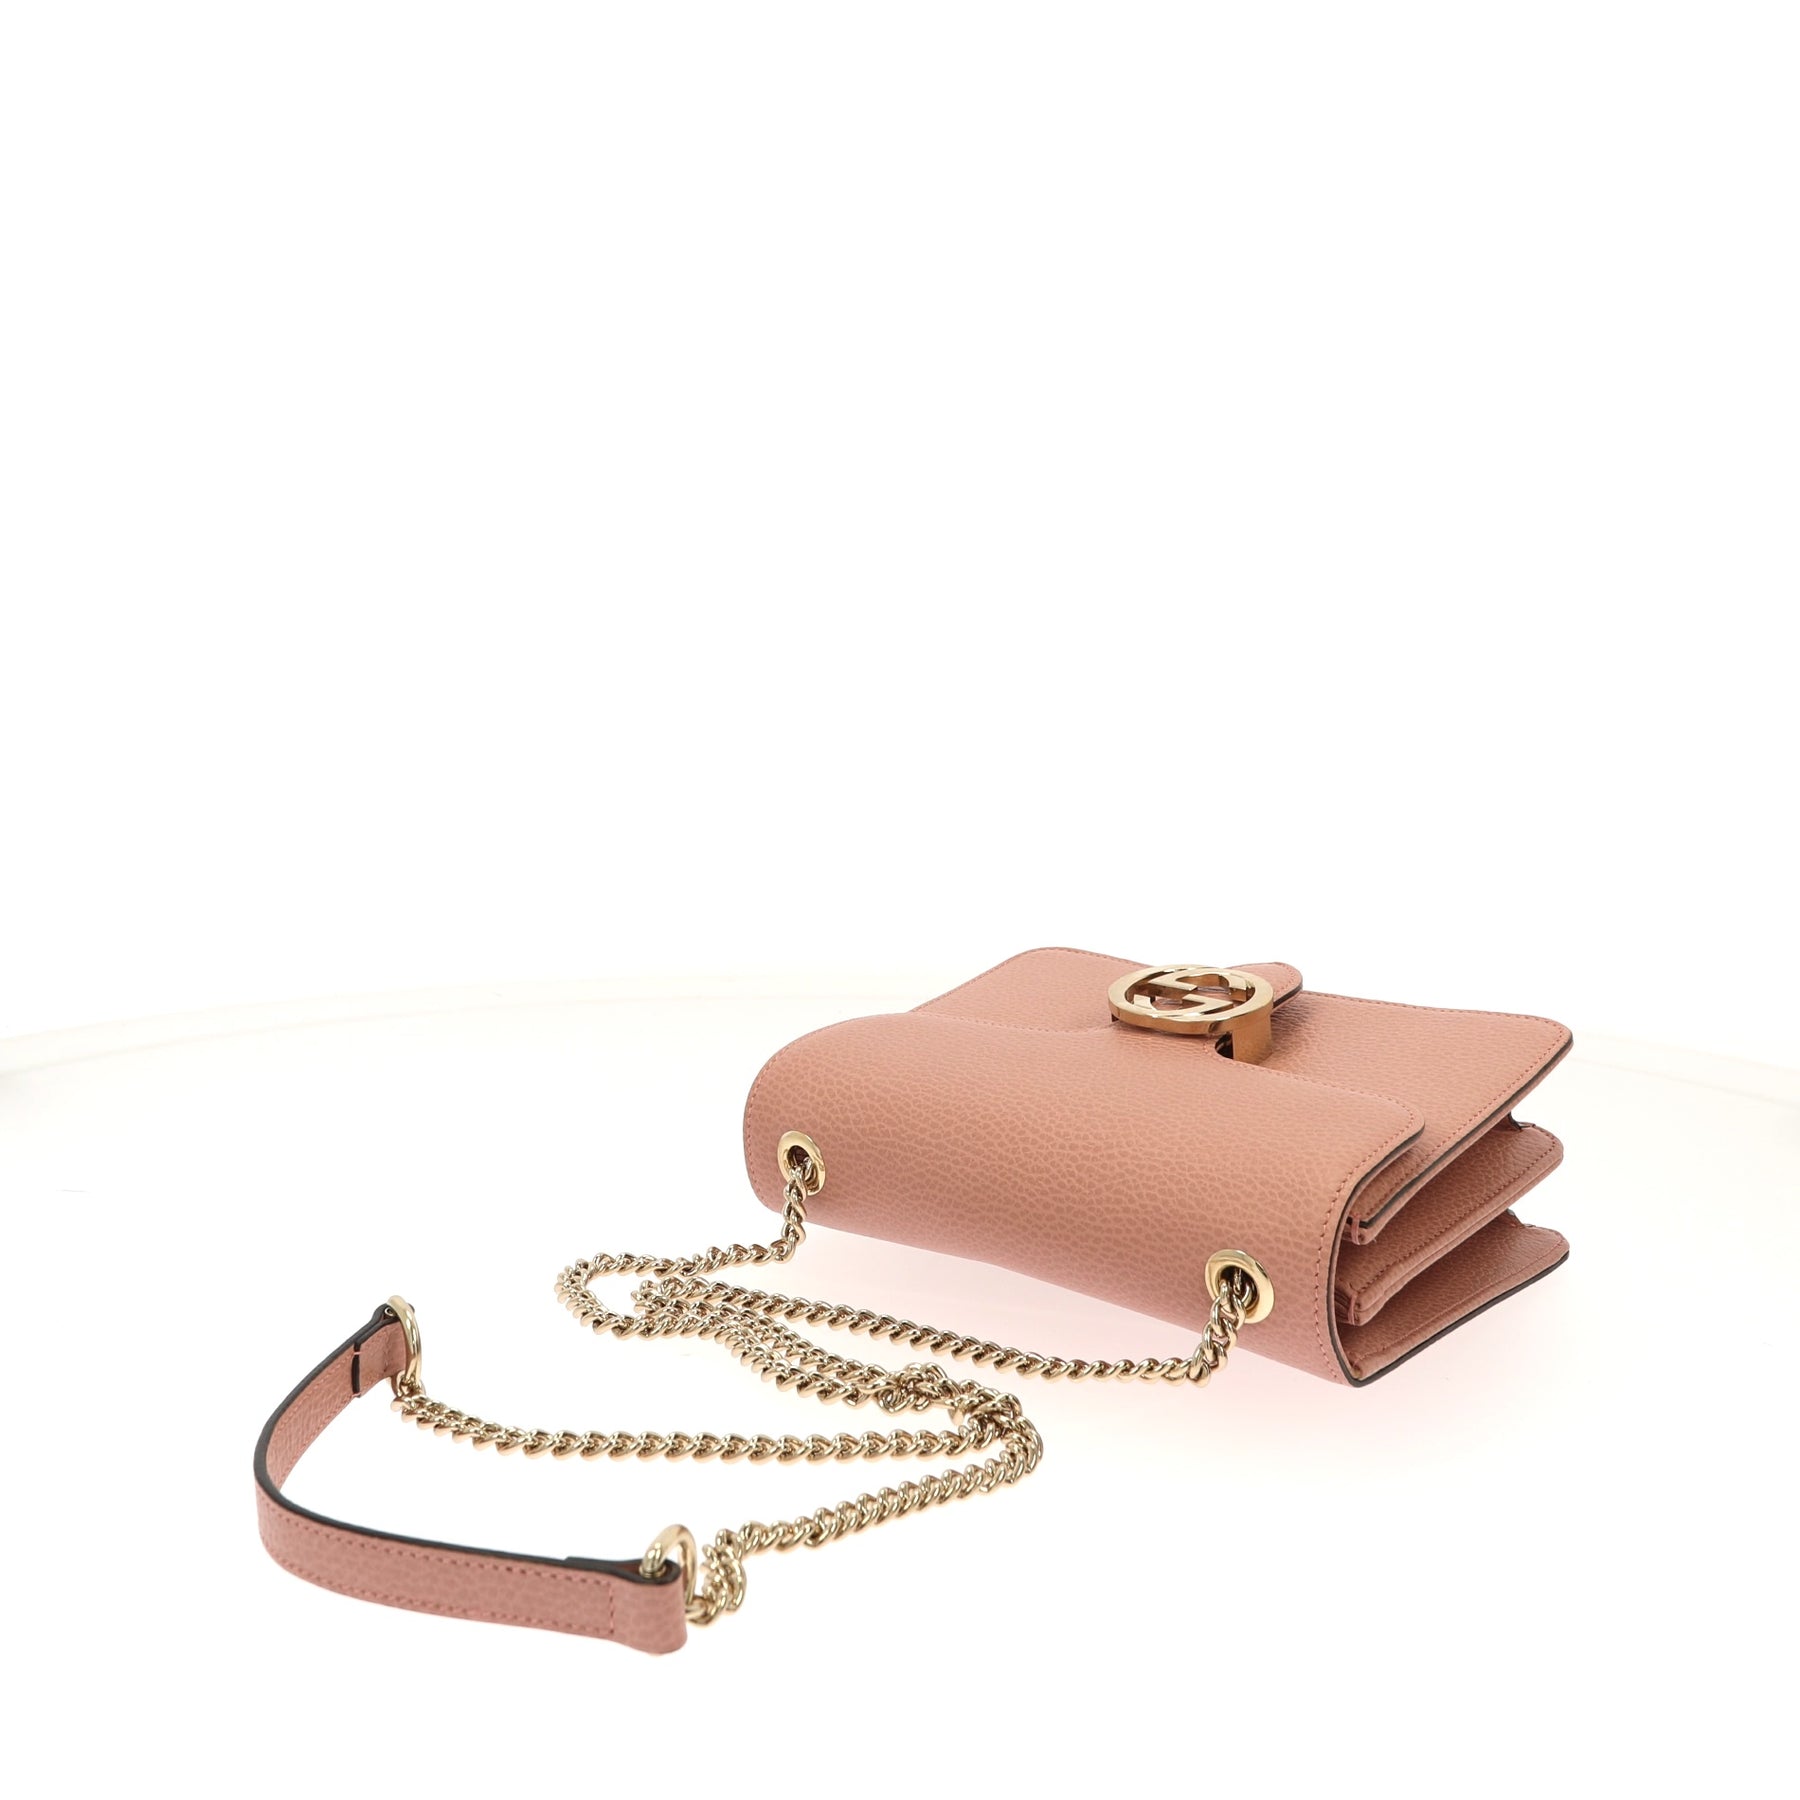 Gucci Interlocking Chain Pink Leather Cross Body Bag designed and made for  women who want to be noticed in society. #Gucci #GucciBa…